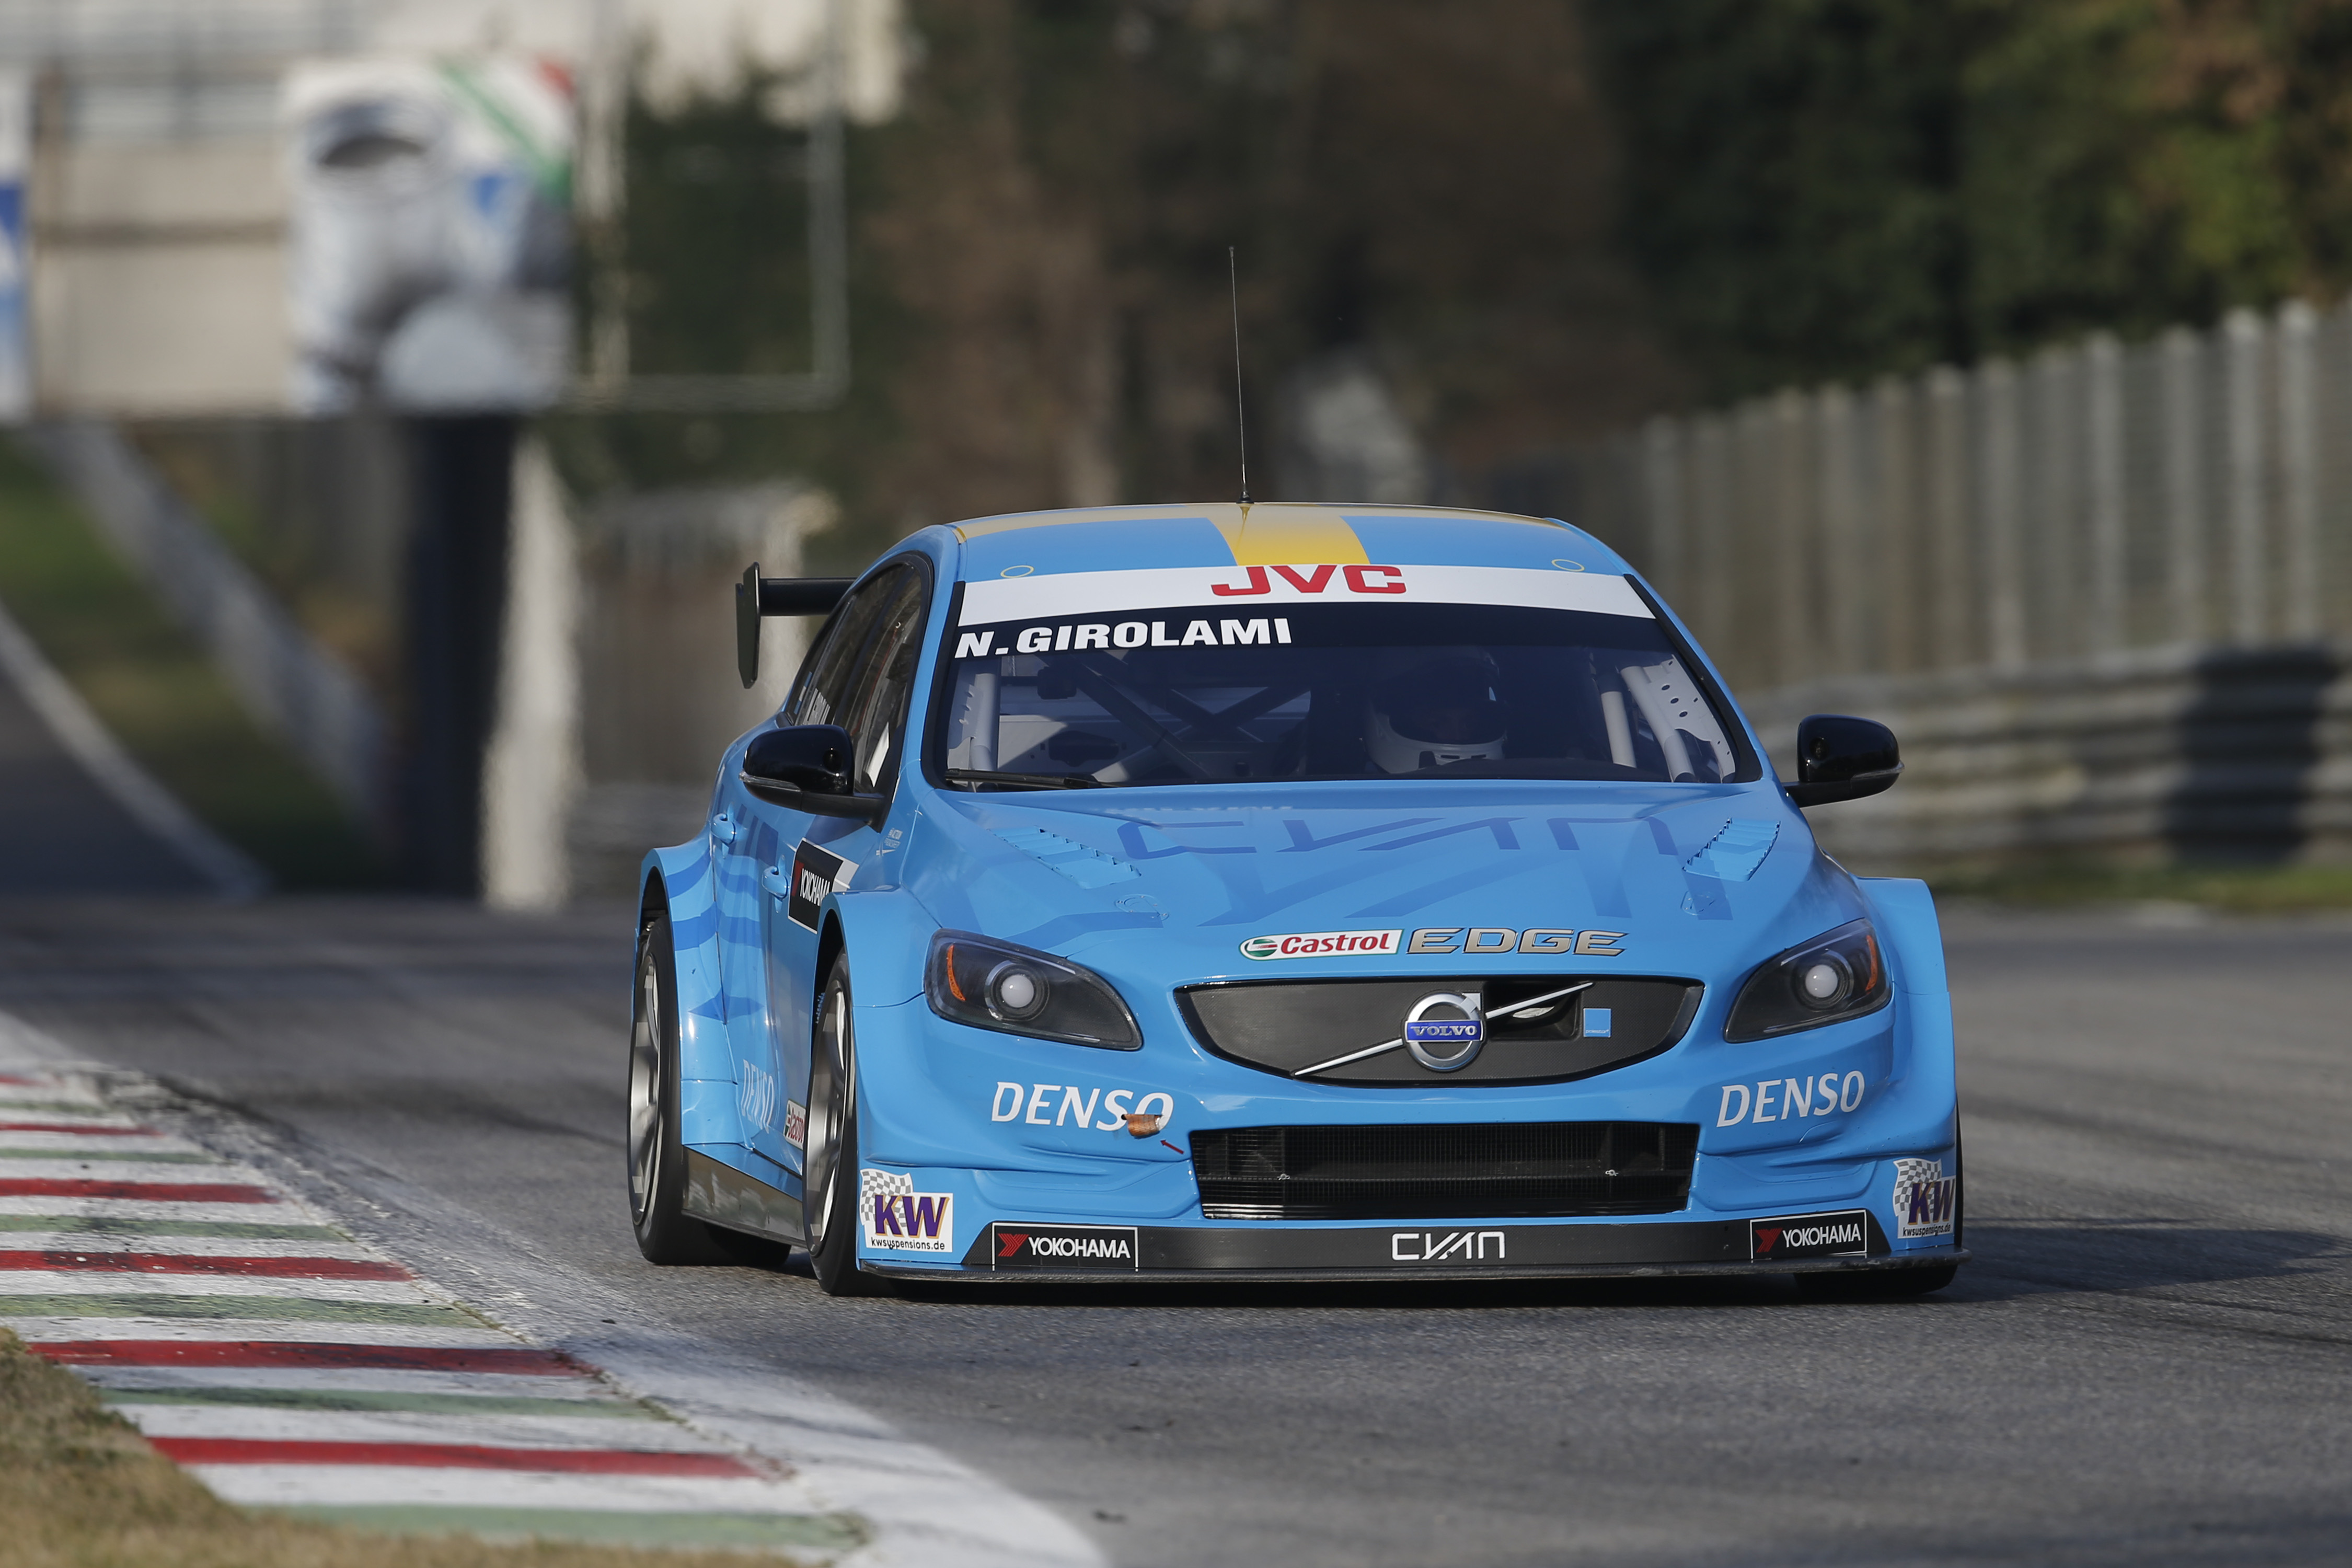 61 GIROLAMI Nestor (arg) Volvo S60 team Polestar Cyan racing action during the 2017 FIA WTCC World Touring Car Test at Monza  March 13 to 15 - Photo Francois Flamand / DPPI.